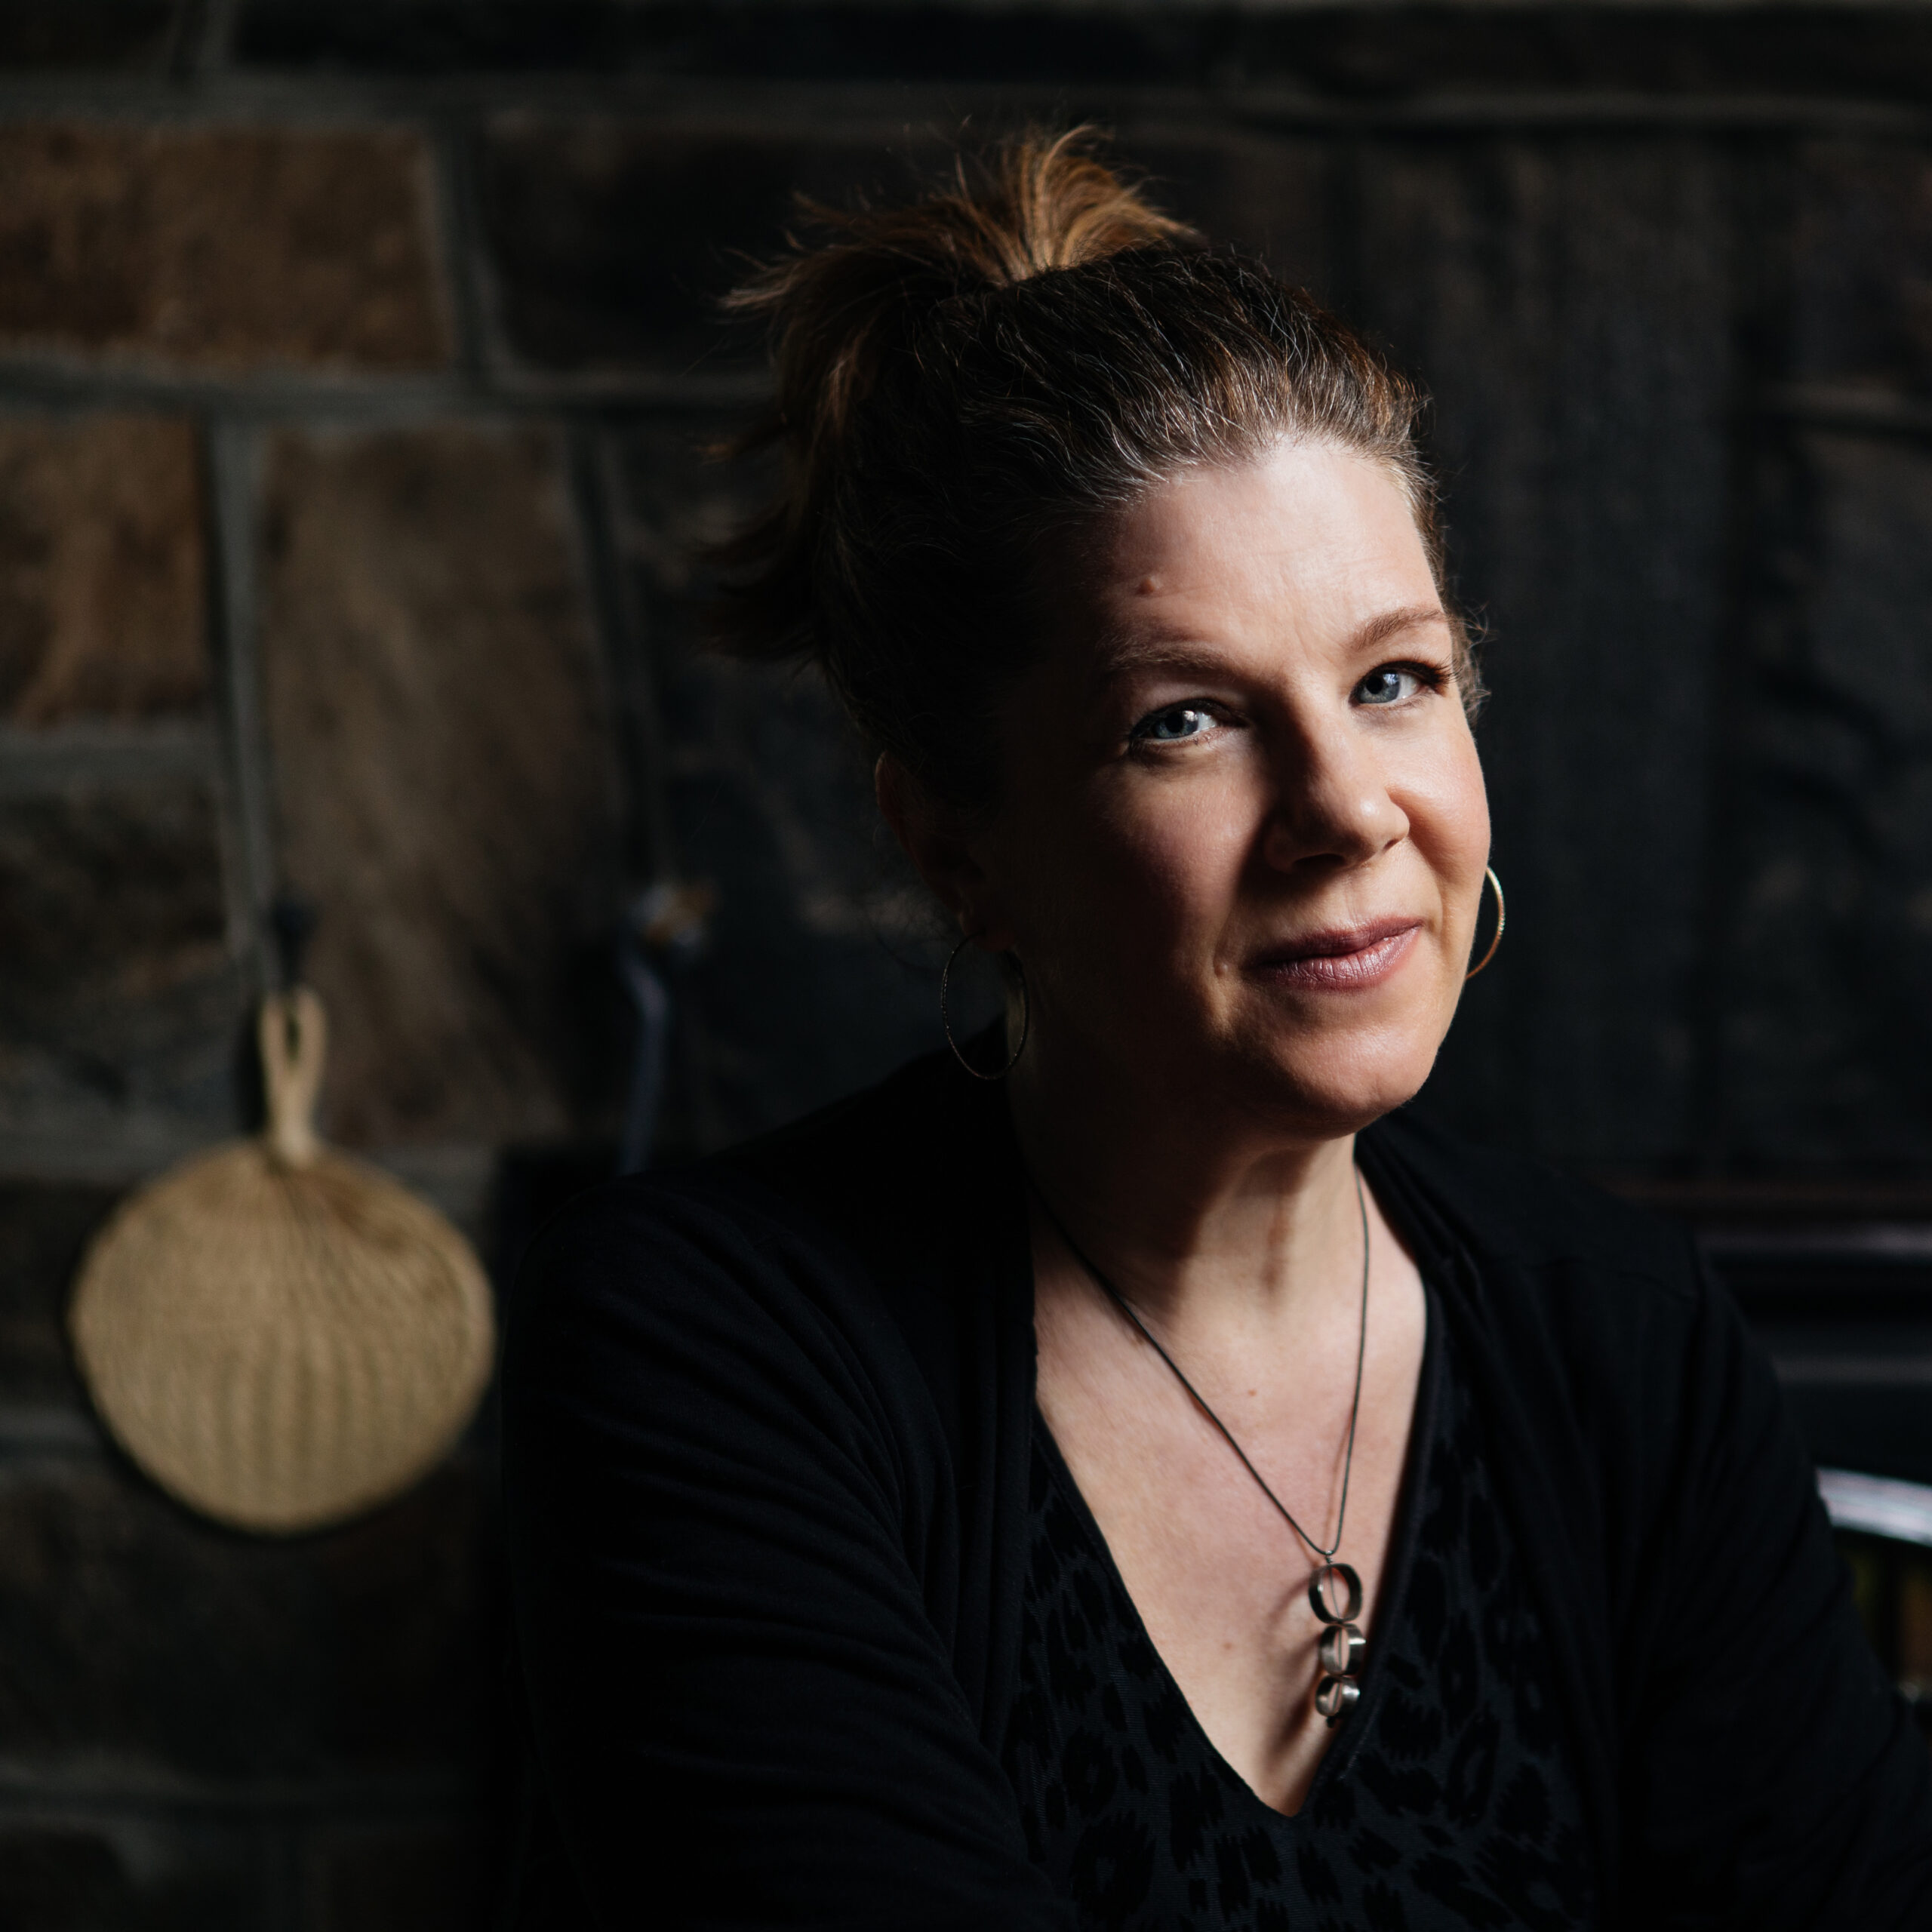 Dar Williams sitting at a table smiling and wearing a black shirt